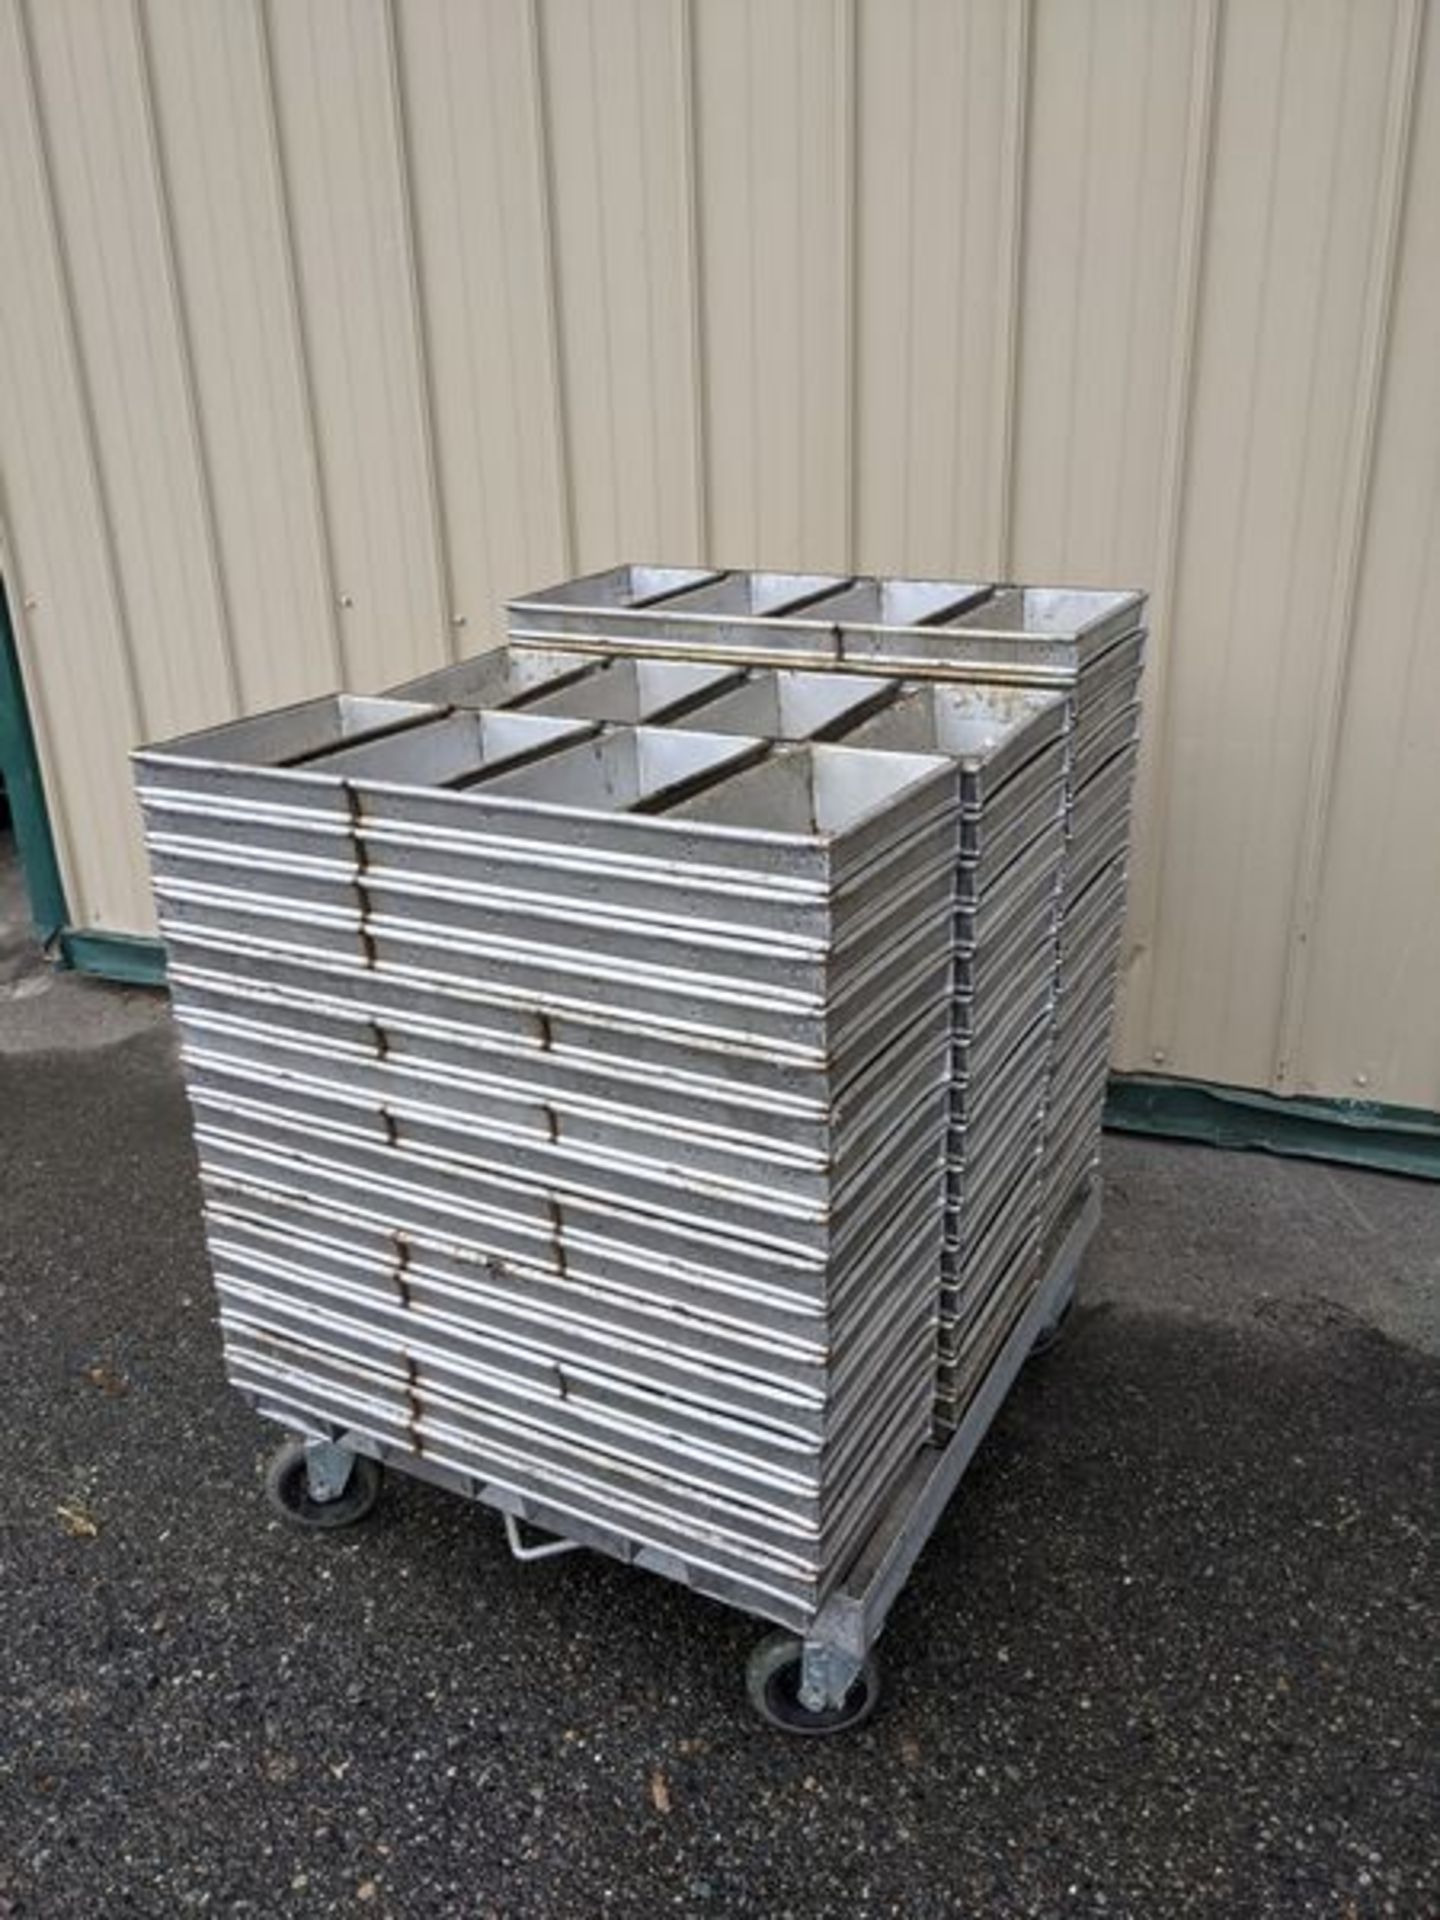 Approx 49 - Four Strap Loaf Pans on Cart